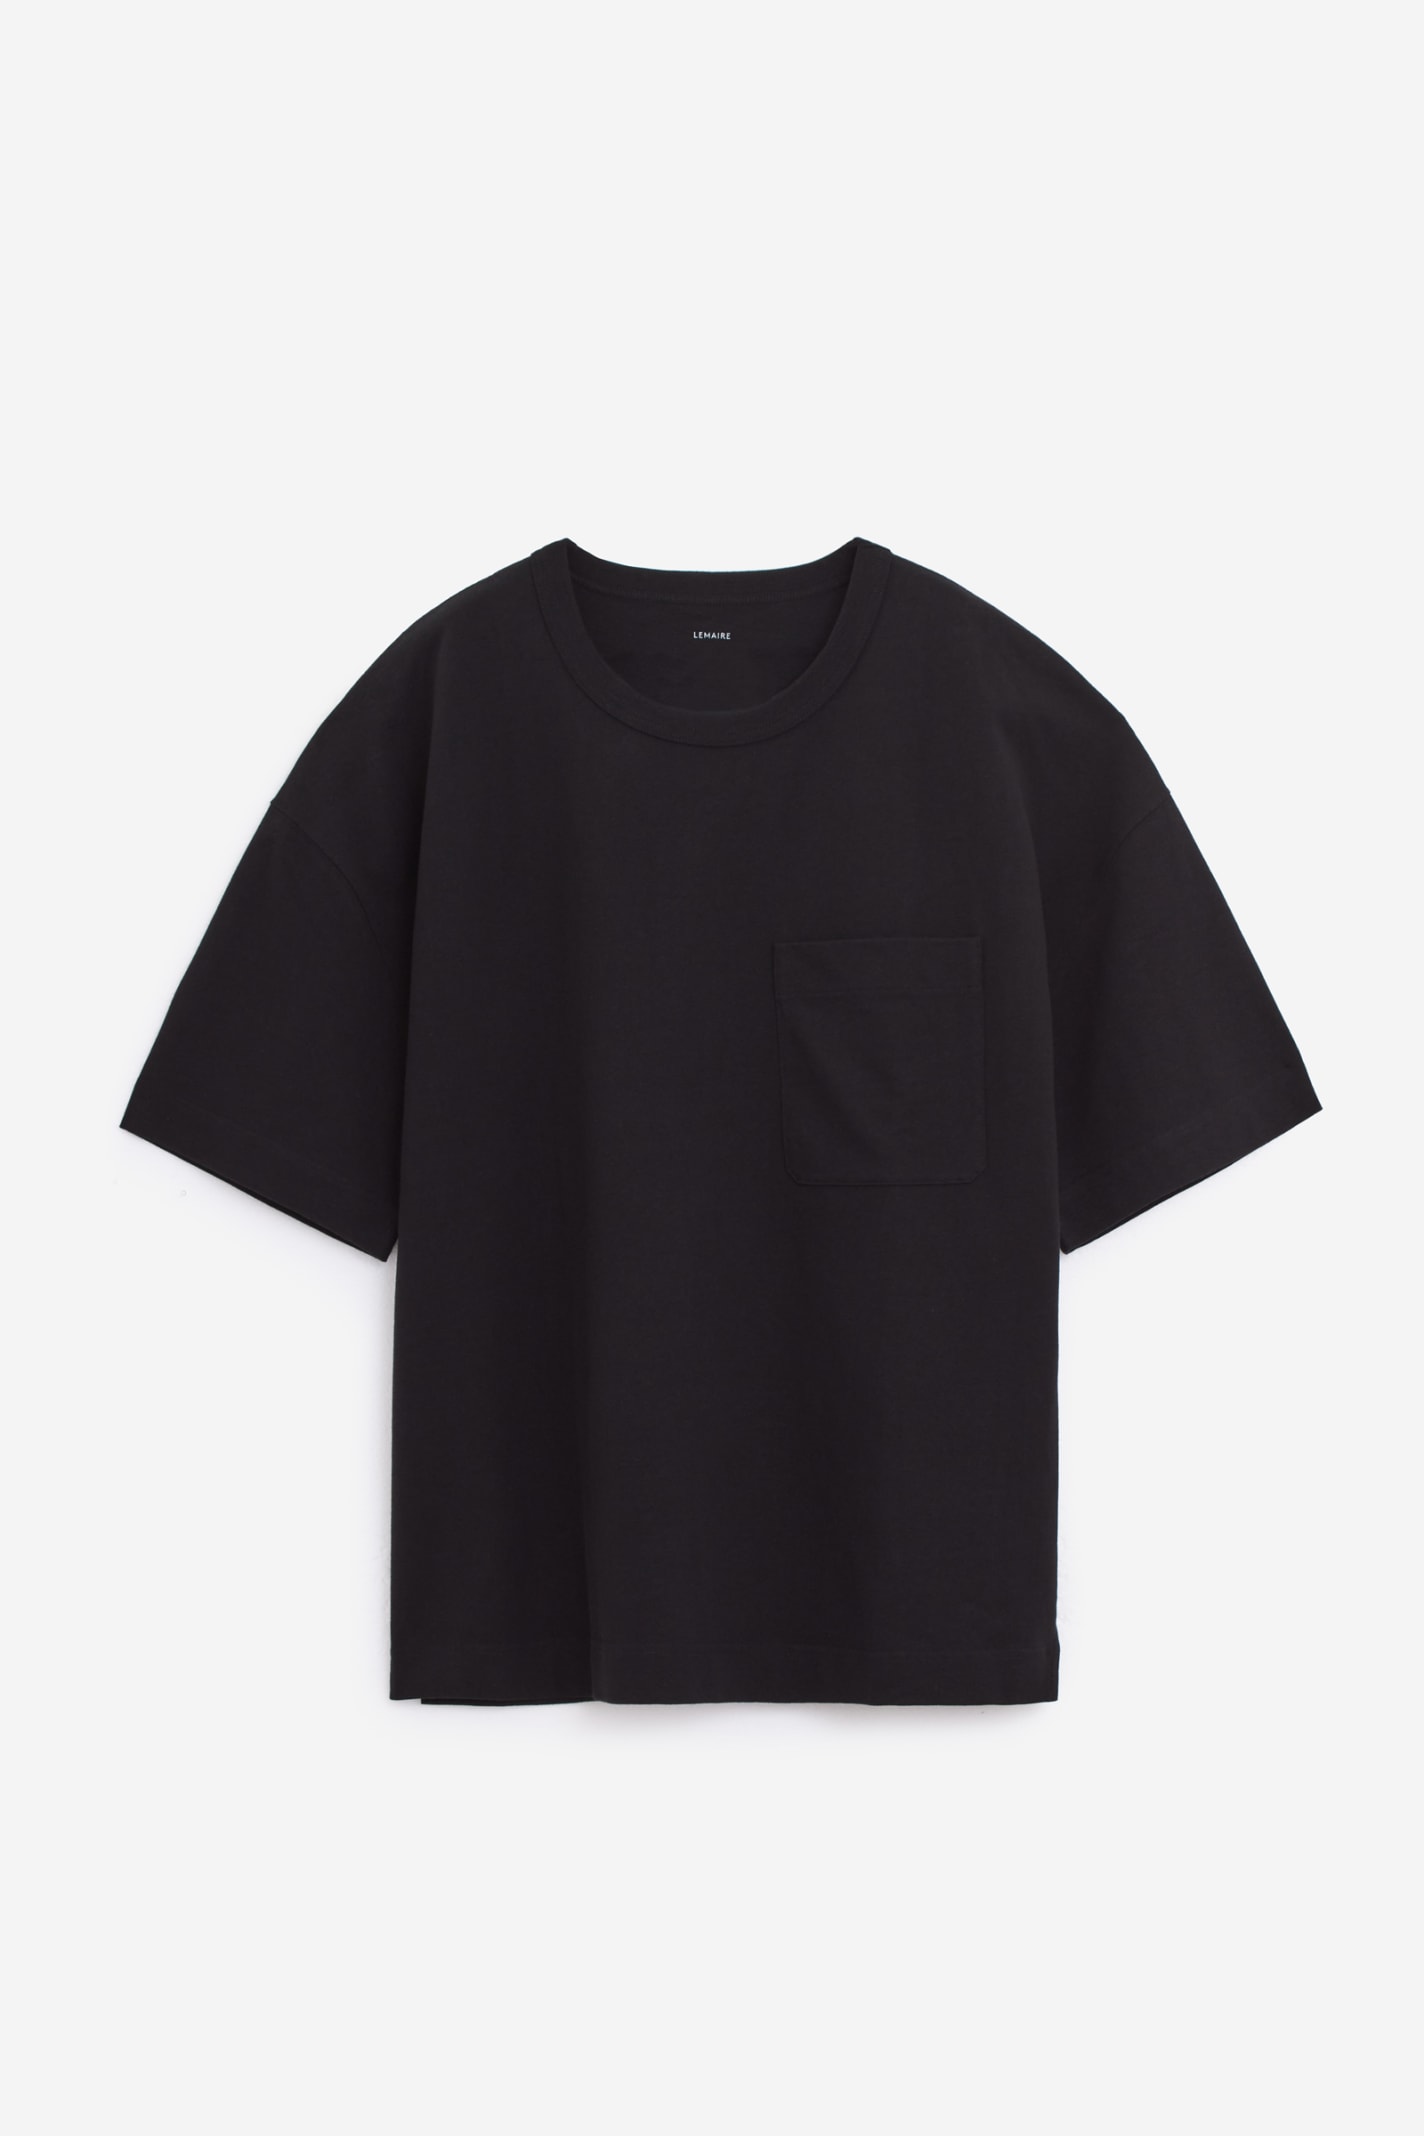 Shop Lemaire Boxy T-shirt T-shirt In Black